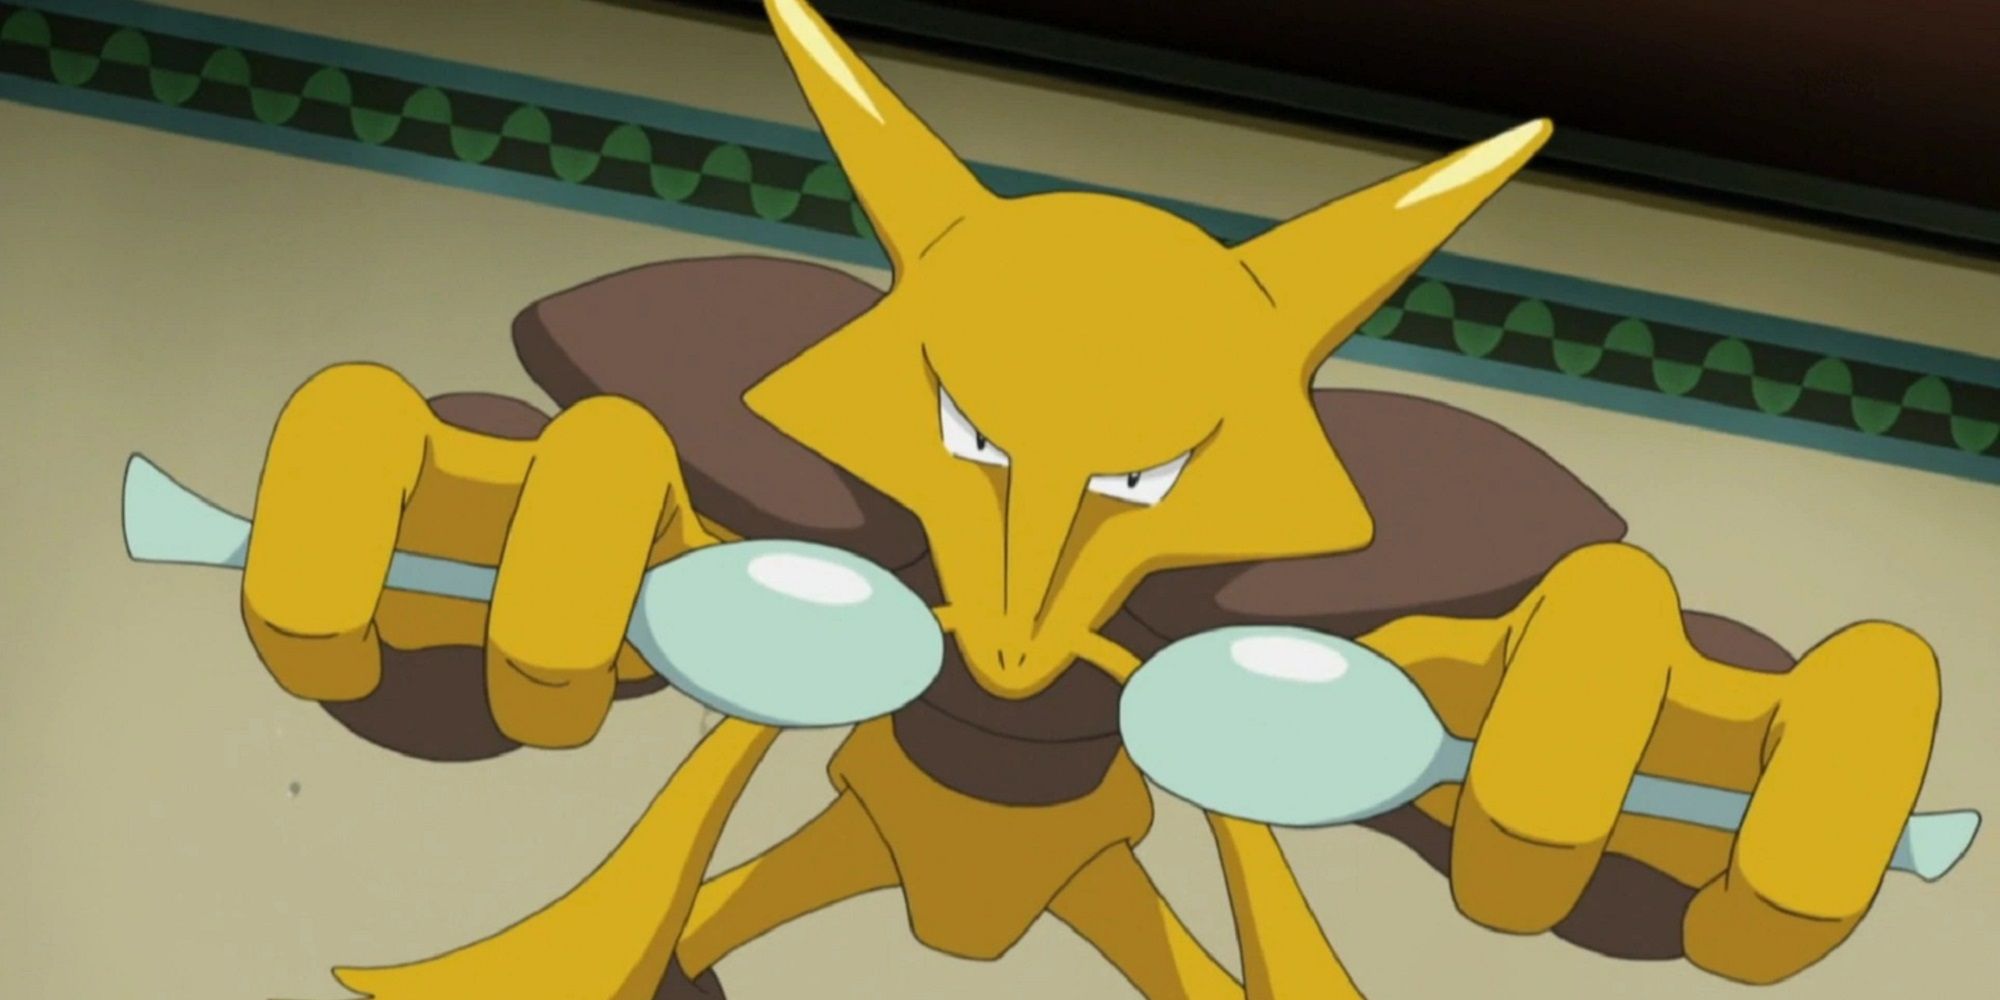 Alakazam holding our their two spoons.